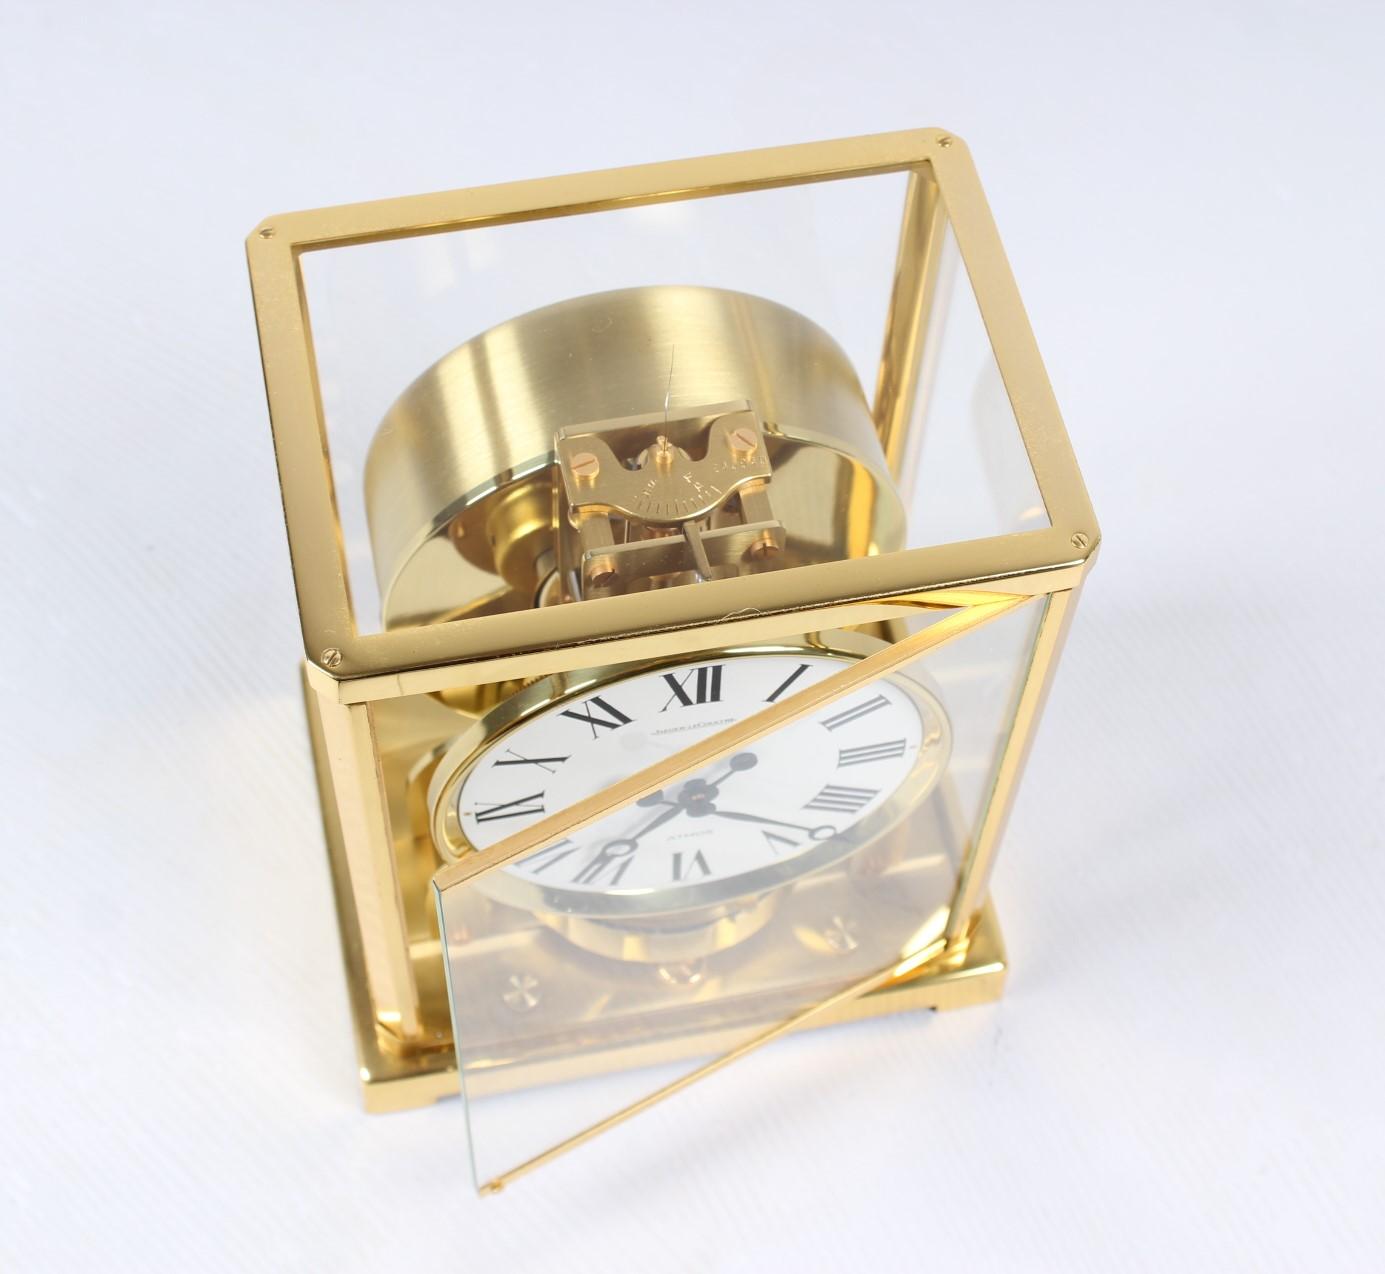 Jaeger-LeCoultre - Atmos Classic clock, cal. 526

Switzerland
brass gold-plated
Year of manufacture 1967

Dimensions: H x W x D 22 x 18 x 13.5 cm

Description:
Atmos V Caliber 526 in a gold-plated brass case.
Classic white dial with Roman